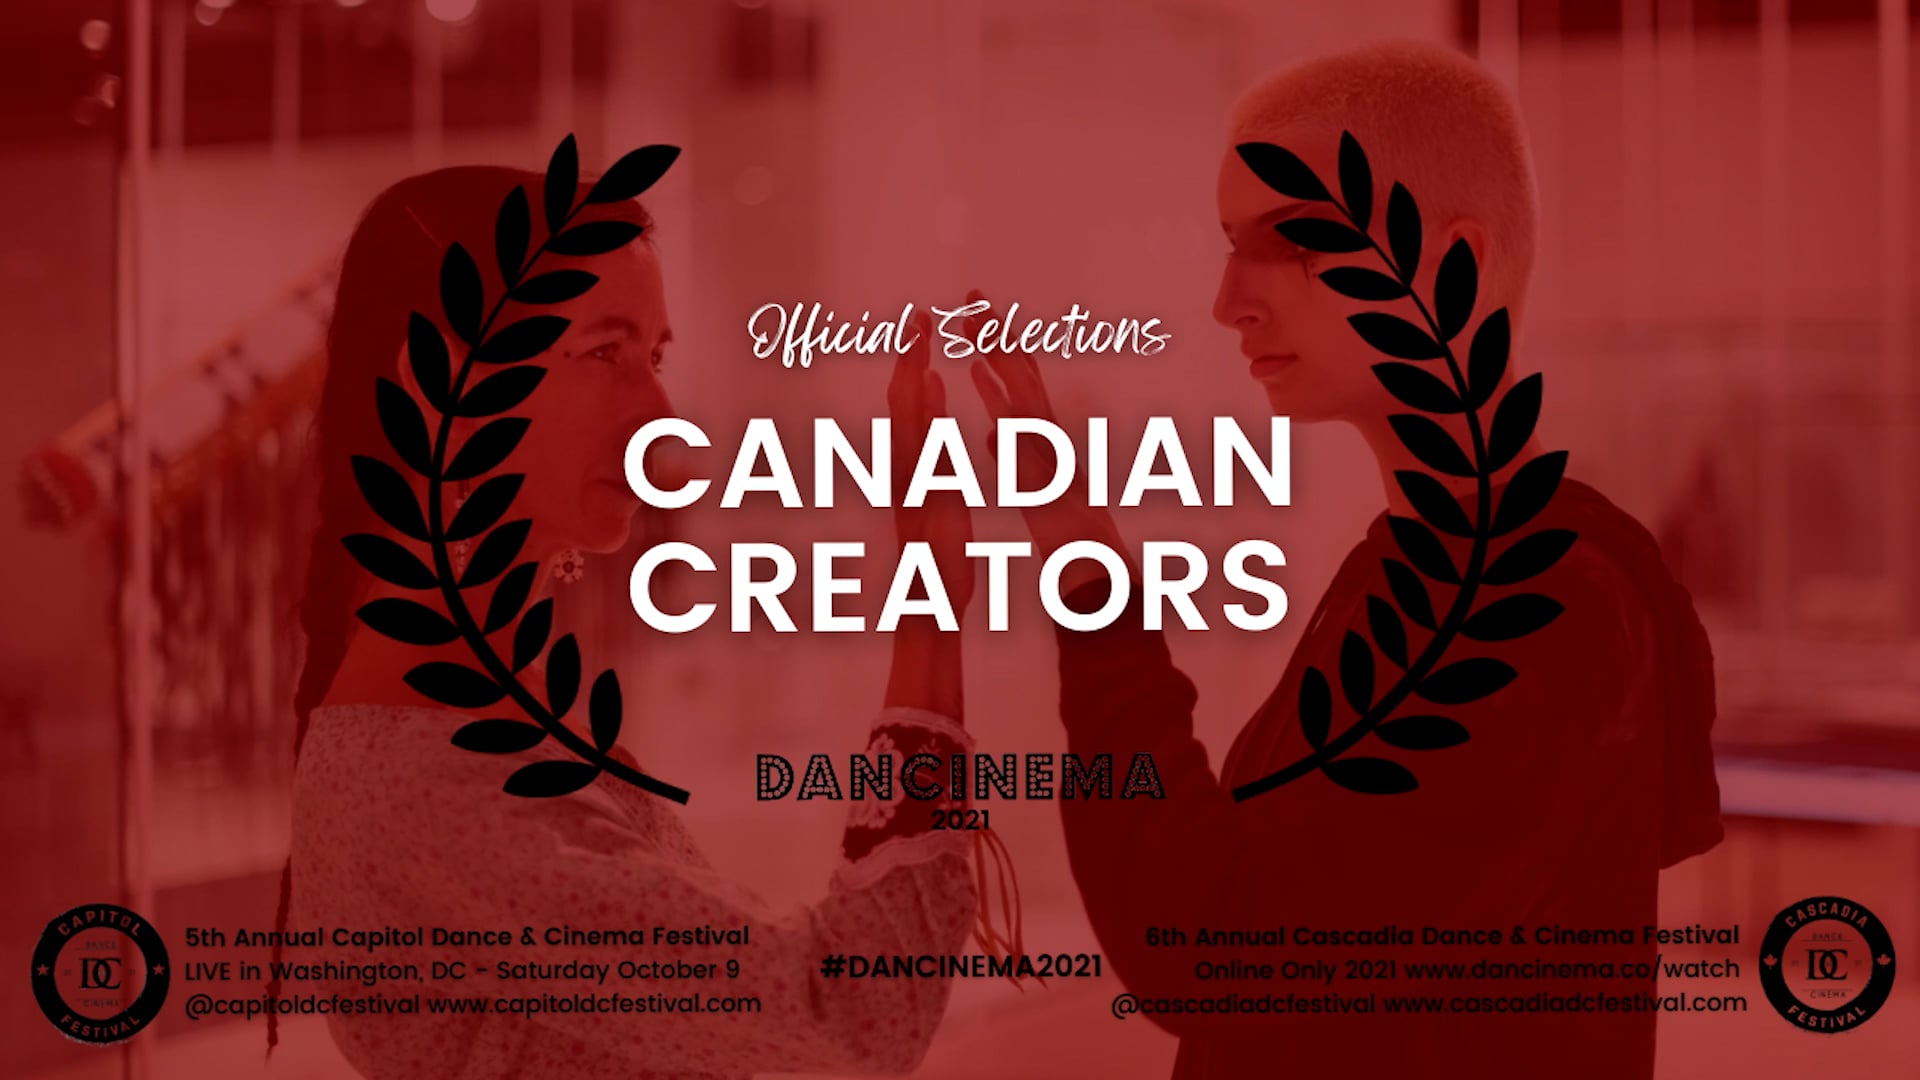 Dancinema 2021: PROJECT LULLABY (ON, CANADA)